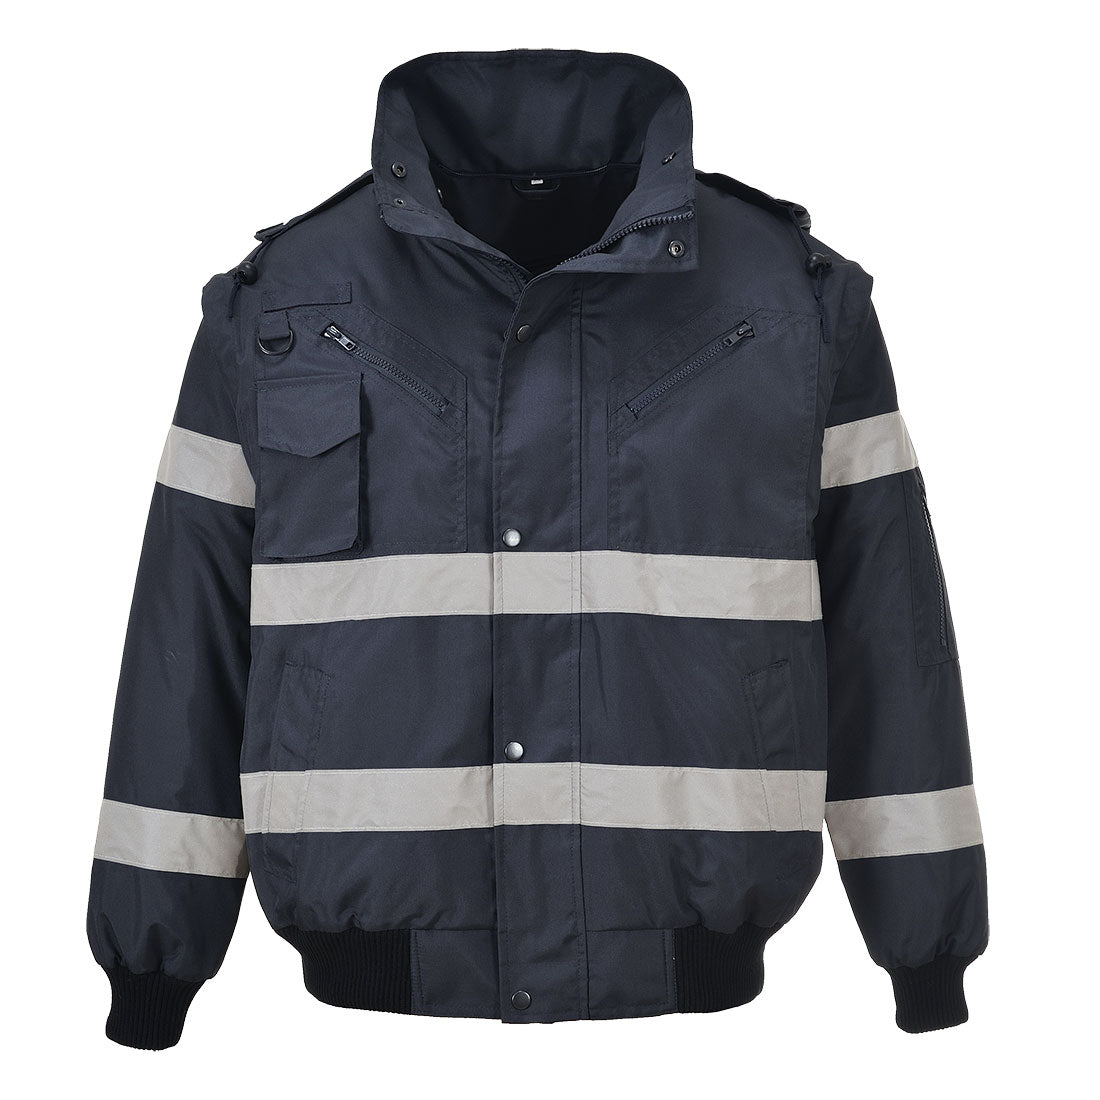 Iona 4-in-1 Bomber Jacket, Morgans PW